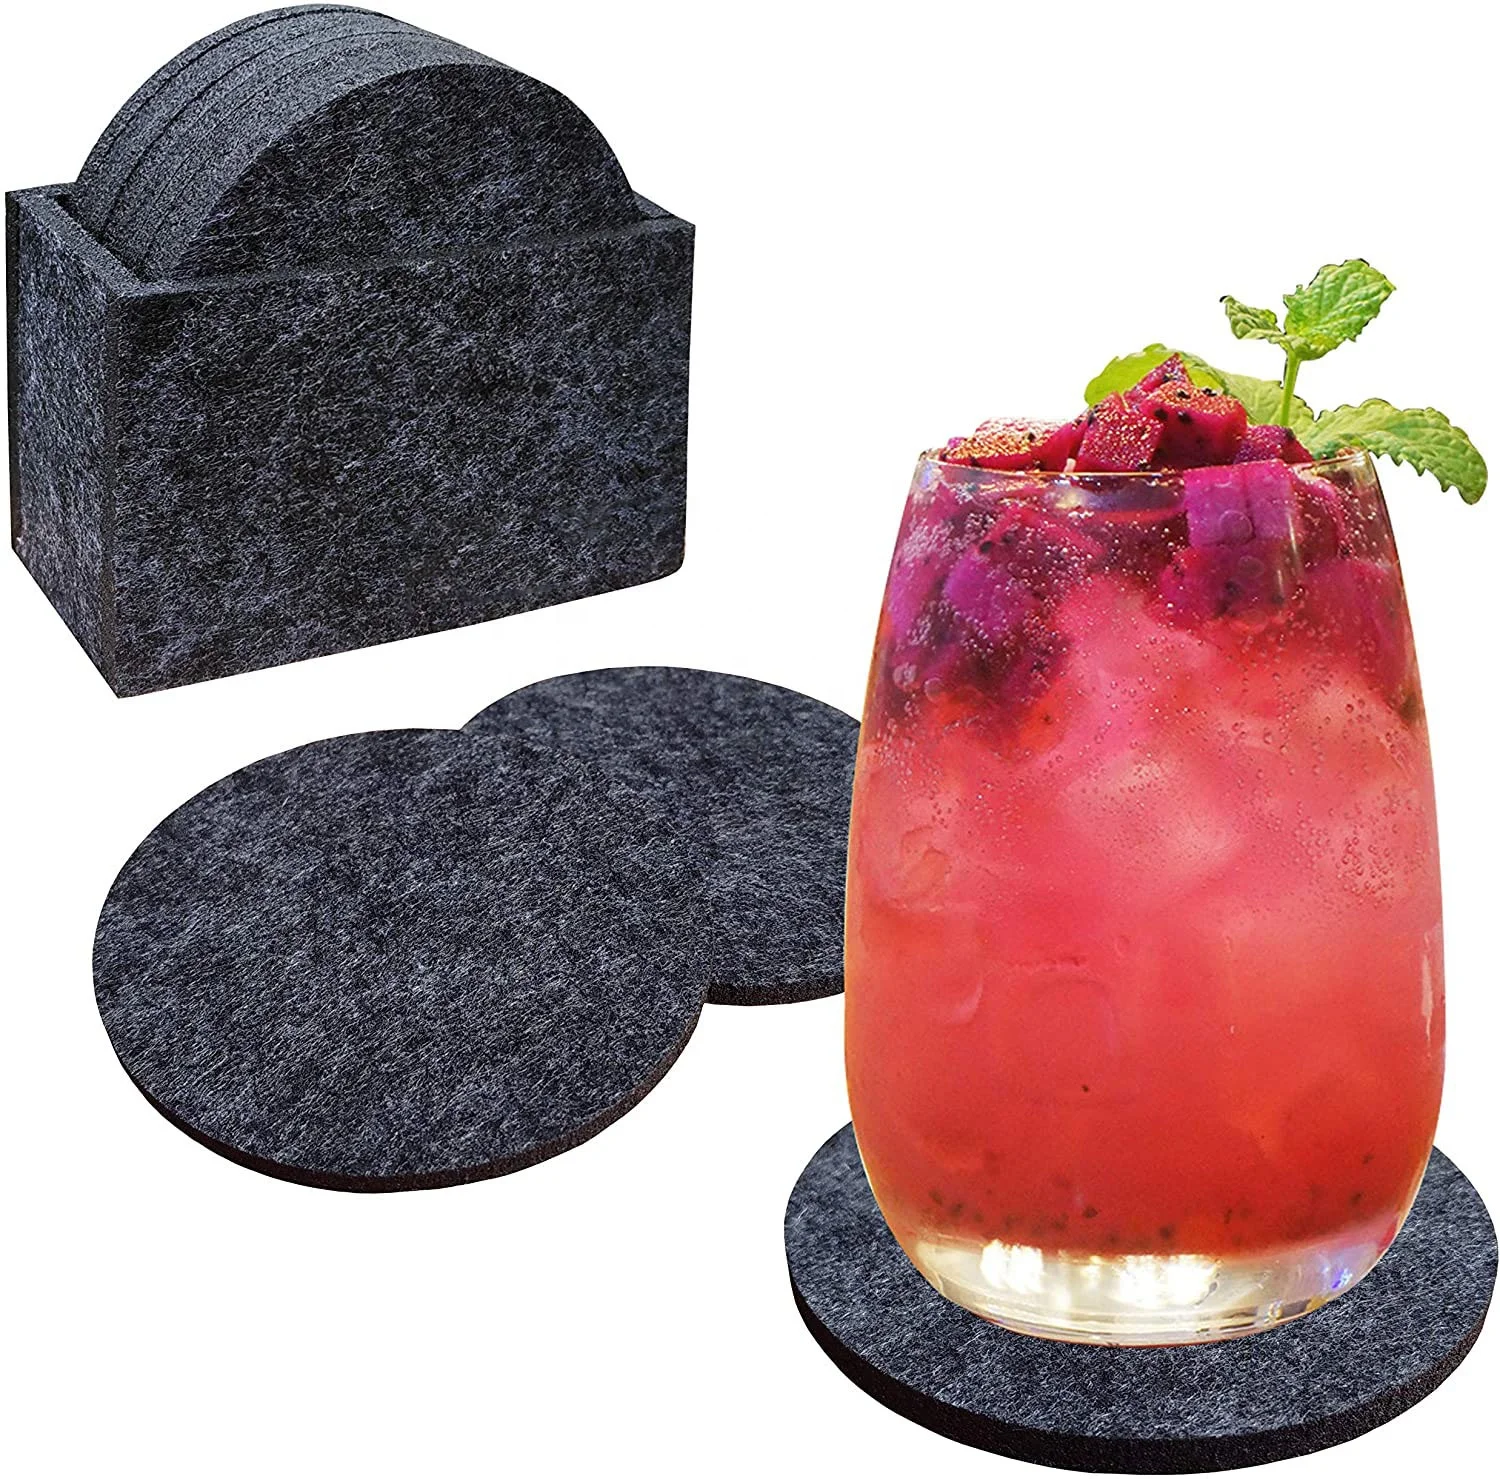 

TCM-A701 Unique Round Square Felt Drink Coaster Cup Mat Premium Felt Cup Glass Coasters Set with Holder, Grey or customized